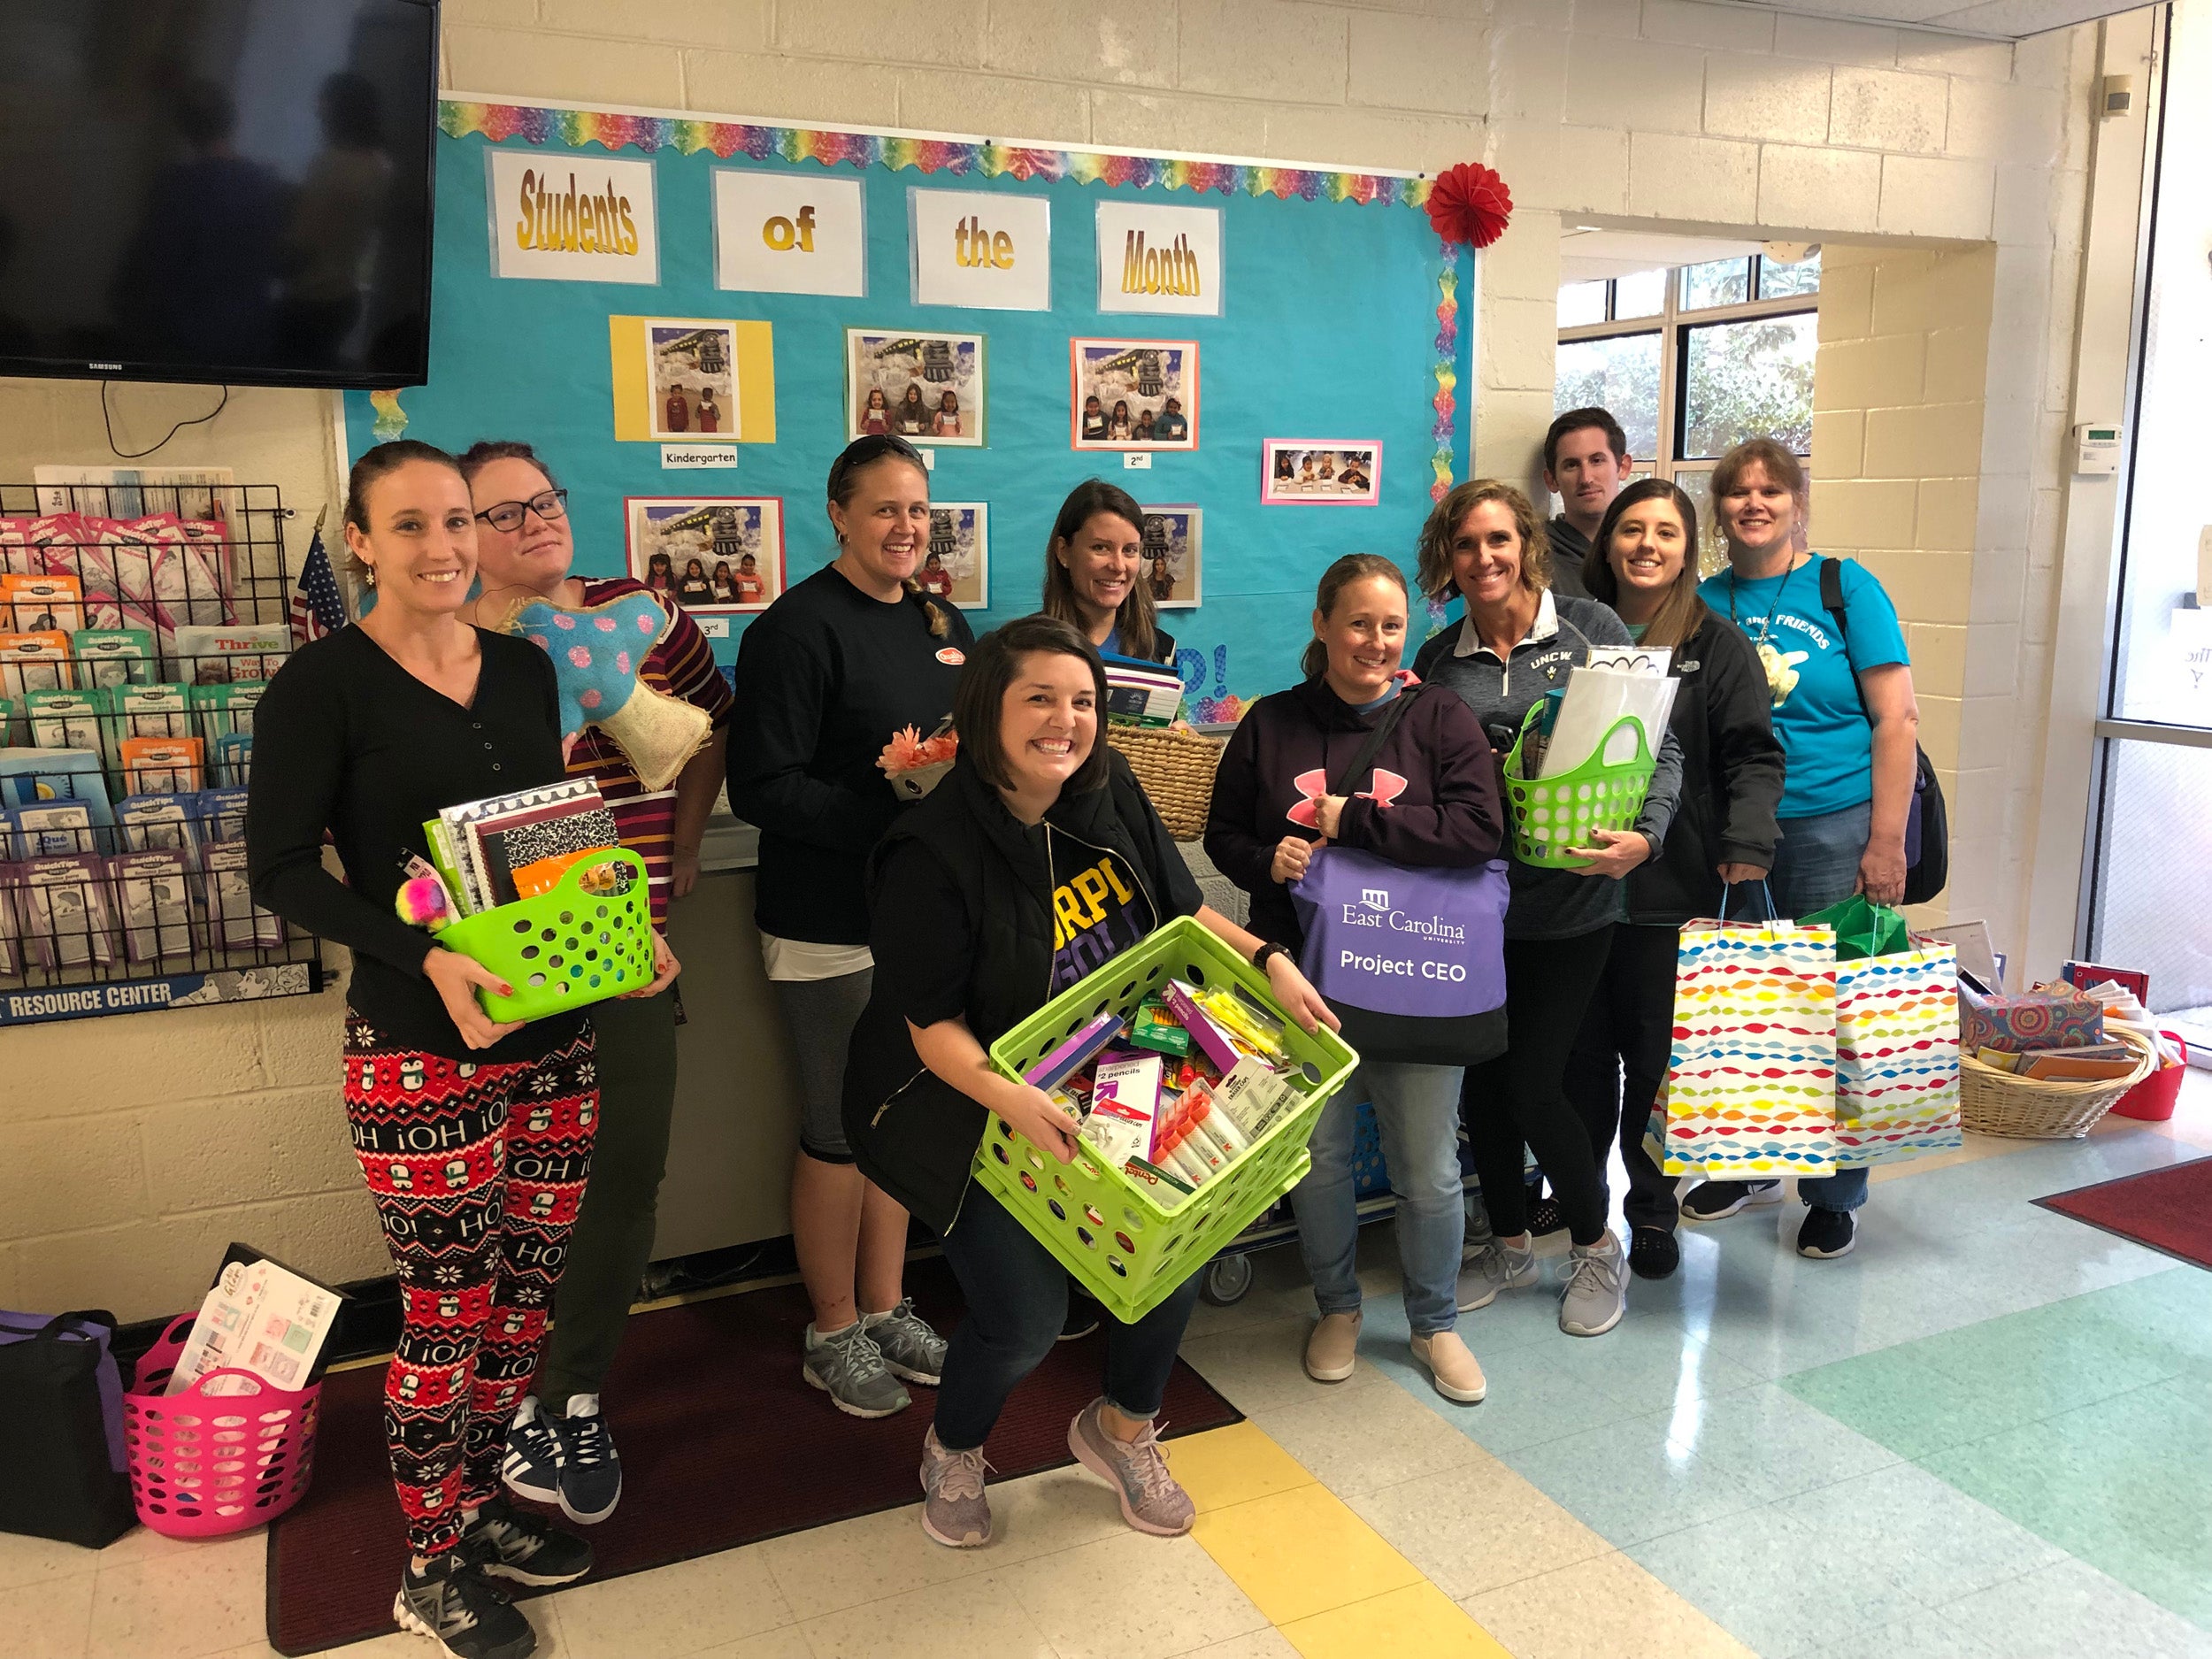 Lauren Patterson and nine graduate students in the College of Education – all from the Raleigh area – collected school supplies for children impacted by Hurricane Florence. 